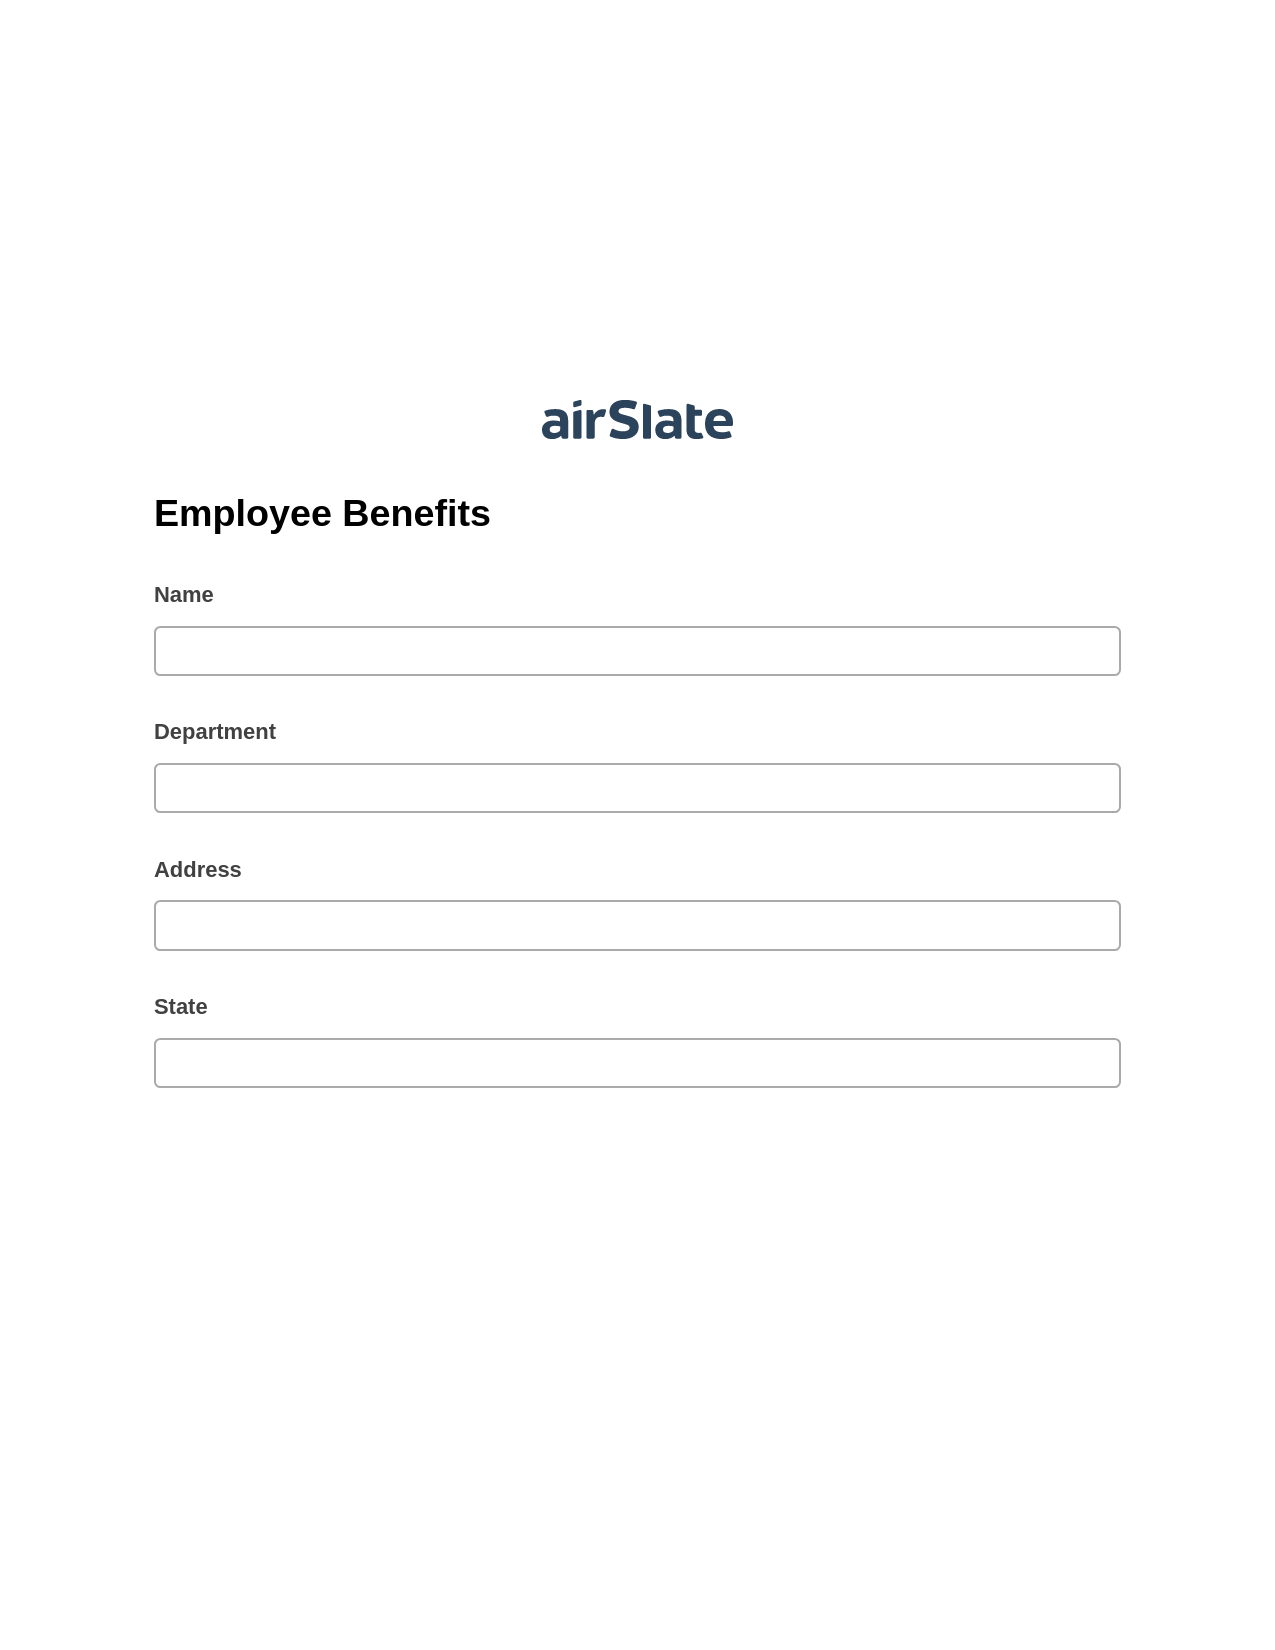 Employee Benefits Pre-fill Slate from MS Dynamics 365 Records Bot, Add Tags to Slate Bot, Export to Excel 365 Bot